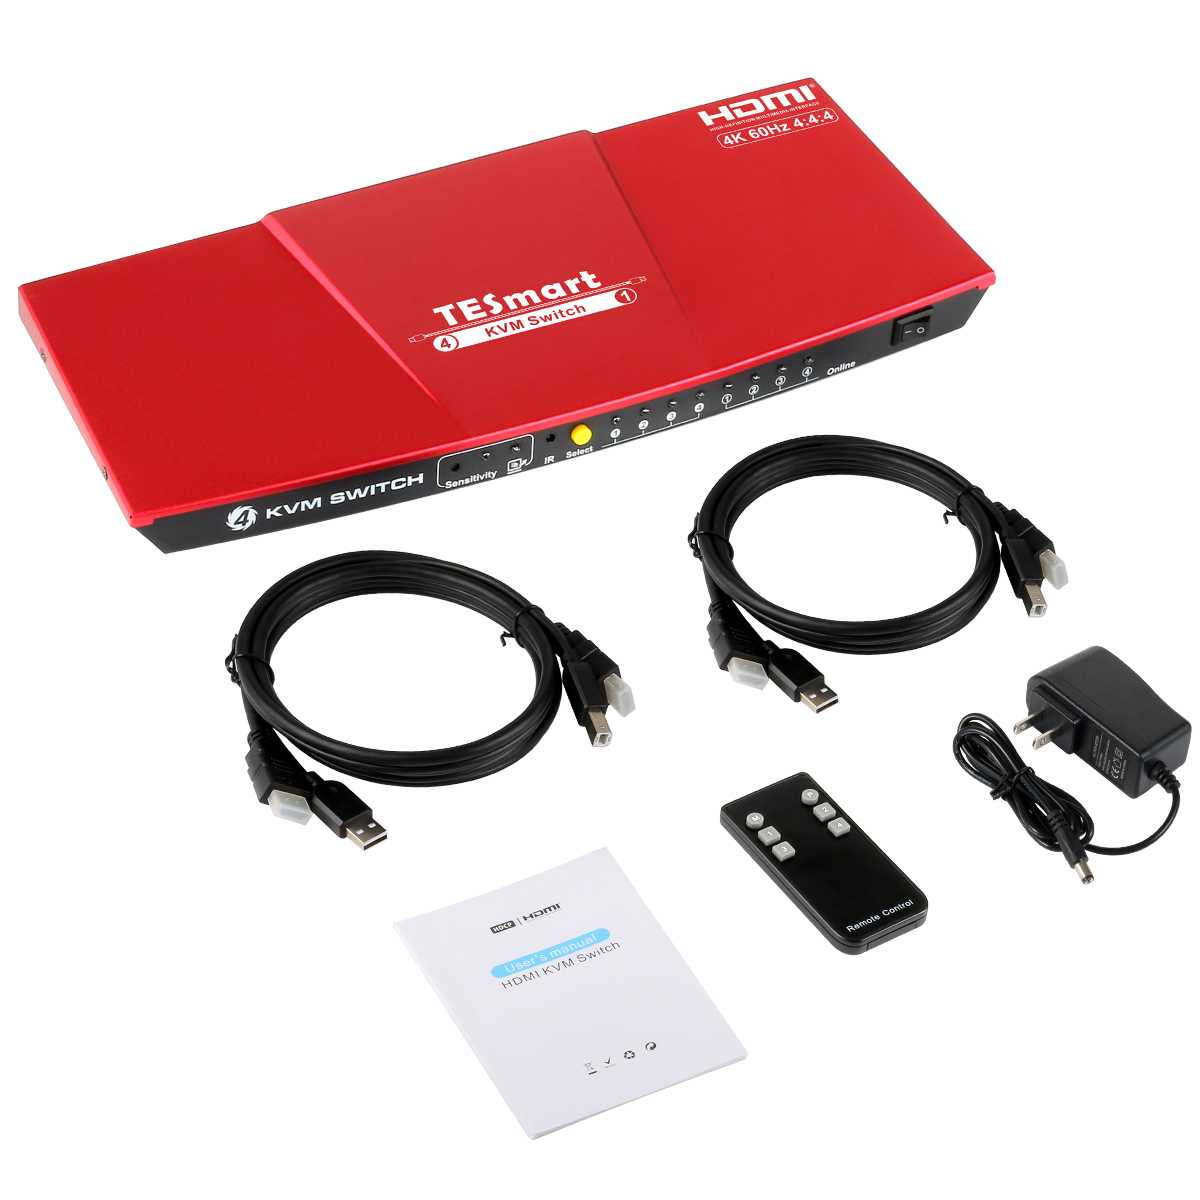 TESmart HDMI KVM Switch 4 ports 4 in 1 out , support 4k 3840*2160@60Hz